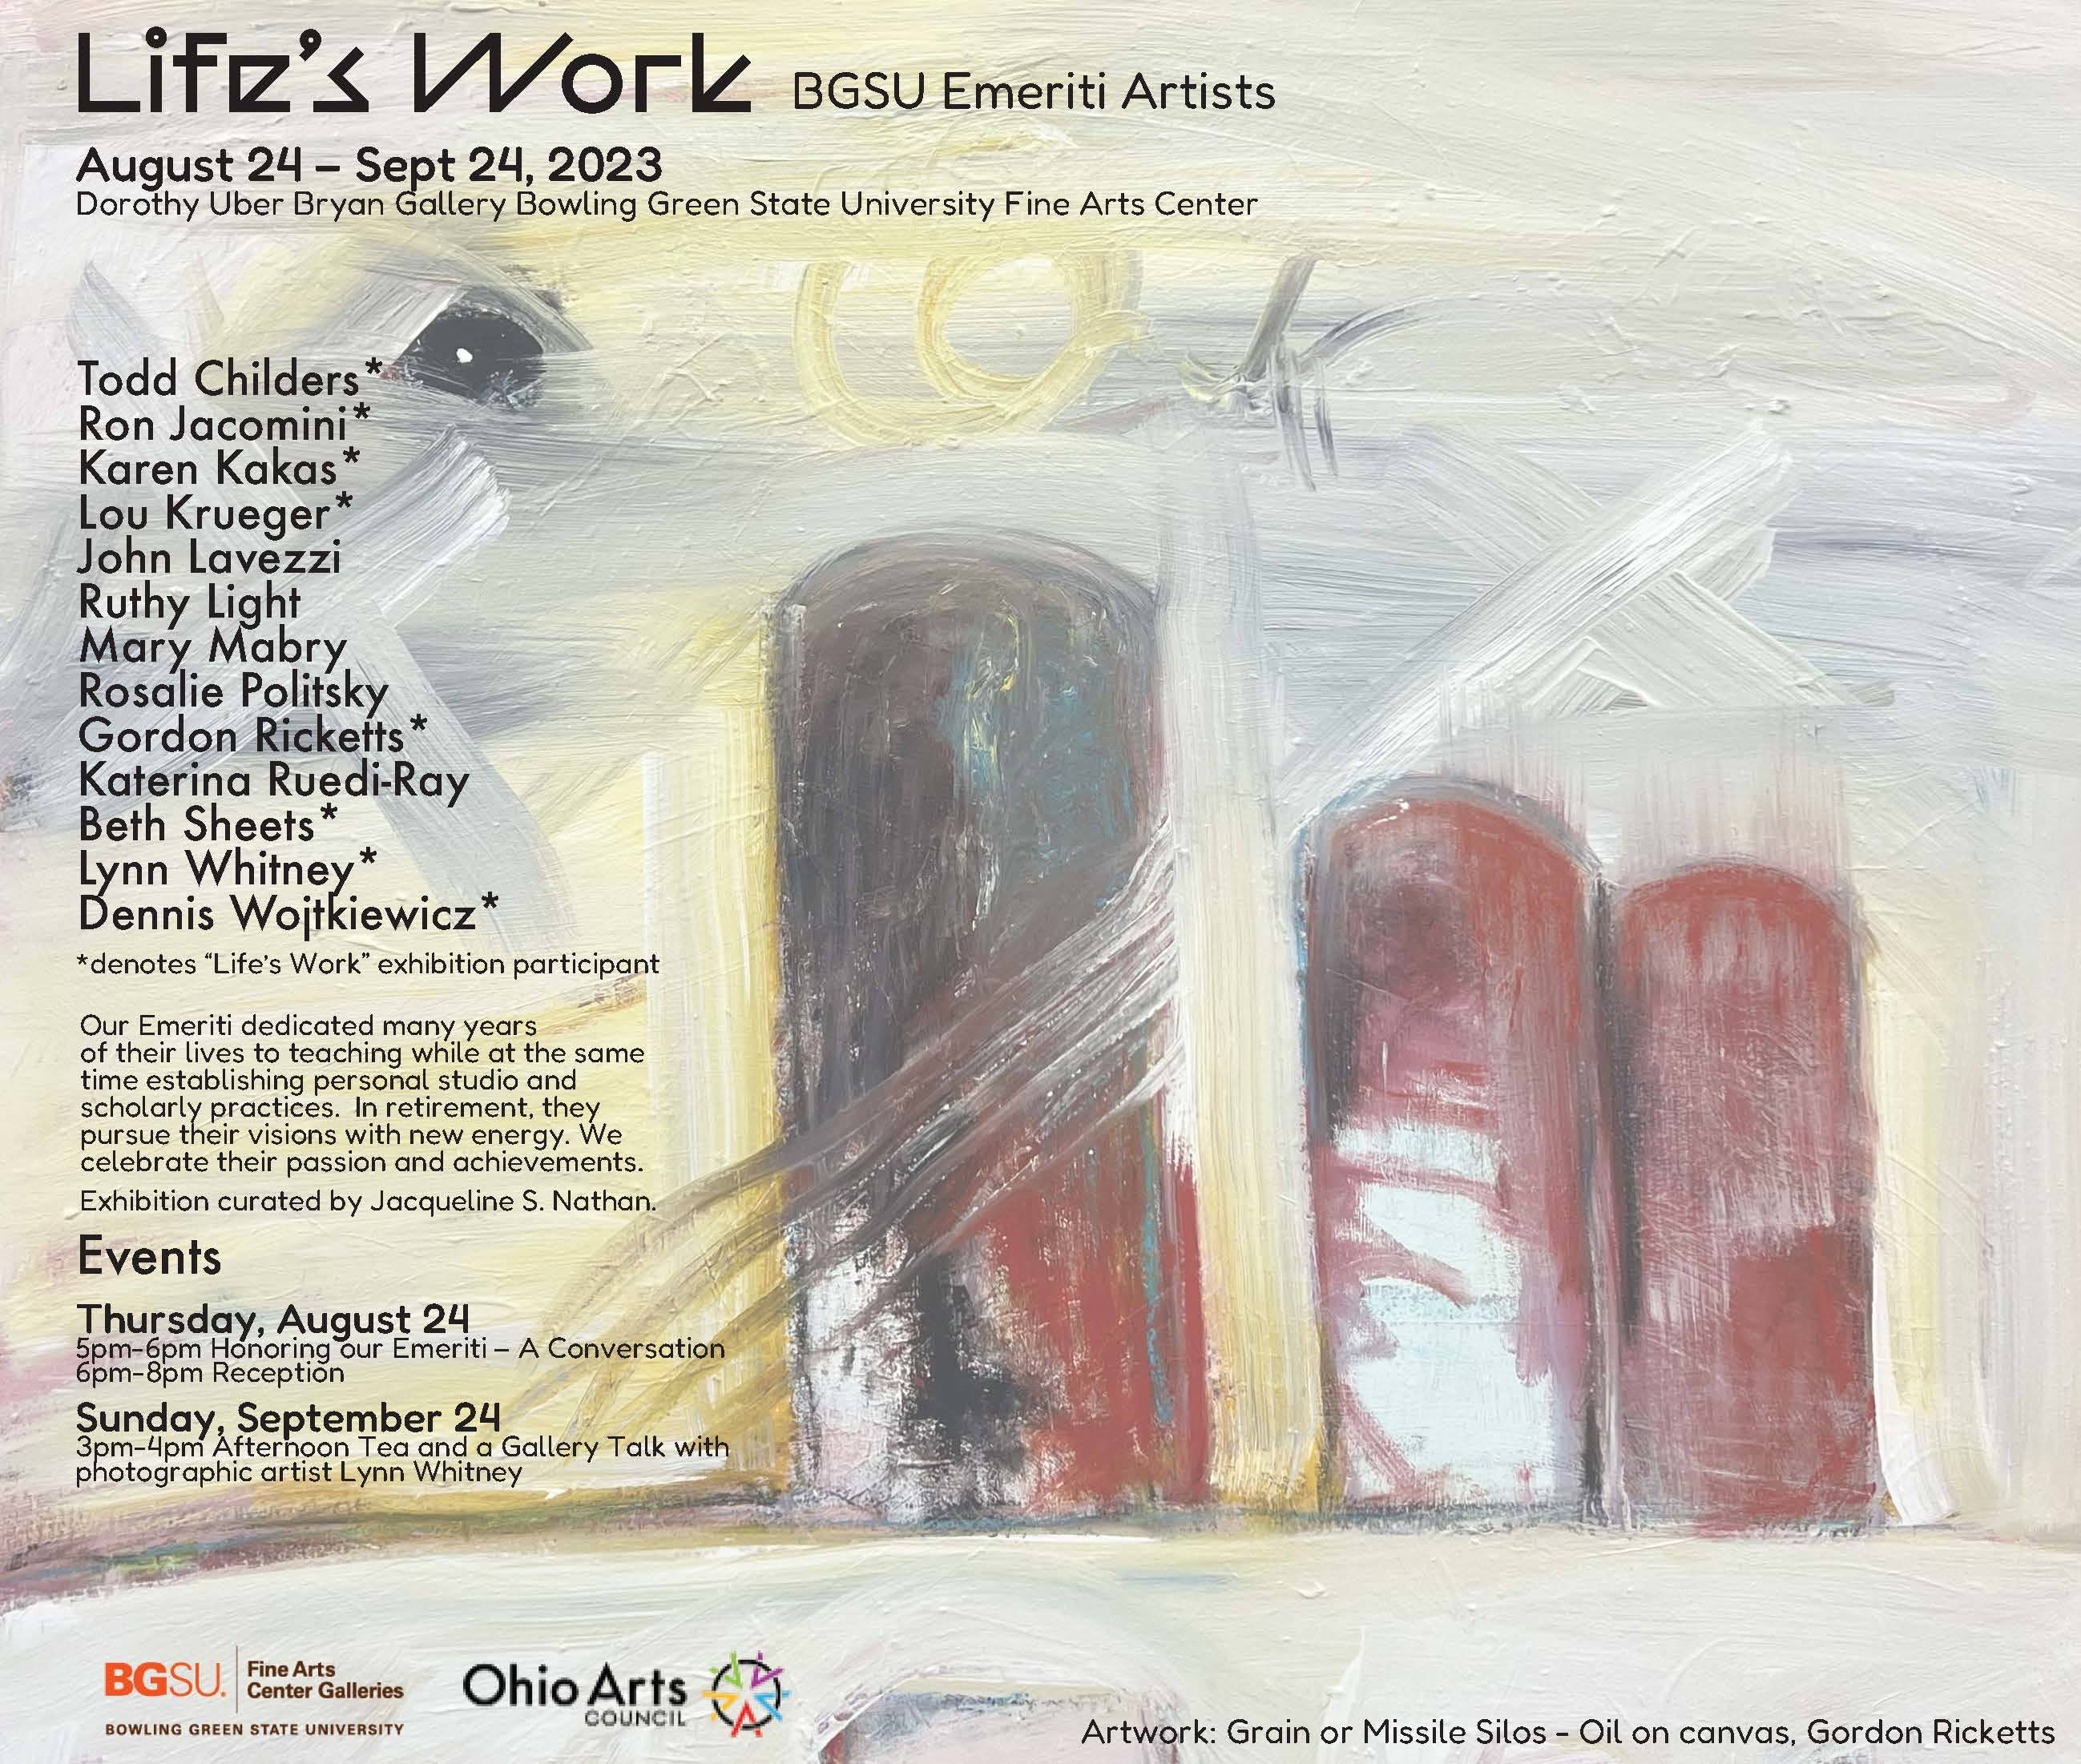 Life’s Work: Honoring BGSU School of Art Emeriti Faculty  Todd Childers*  Ron Jacomini*  Karen Kakas*  Lou Krueger*  John Lavezzi  Ruthy Light  Mary Mabry  Rosalie Politsky  Gordon Ricketts*  Katerina Ruedi-Ray  Beth Sheets*  Lynn Whitney*  Dennis Wojtkiewicz*  Our Emeriti dedicated many years  of their lives to teaching while at the same time  establishing personal studio and scholarly practices.  In retirement, they pursue their visions  with new energy. We celebrate their  passion and achievements.  Events  August 25 – Sept 24 “Life’s Work” Exhibition (curated by Jacqueline S. Nathan)  Dorothy Uber Bryan Gallery, Fine Arts Center  Thursday Aug 24 Exhibition Opening  5pm-6pm Honoring our Emeriti – A Conversation  6pm-8pm Reception  Sunday Sept 24 Exhibition Event  3pm-4pm Afternoon Tea and a Gallery Talk with Lynn Whitney  *denotes “Life’s Work” exhibition participant